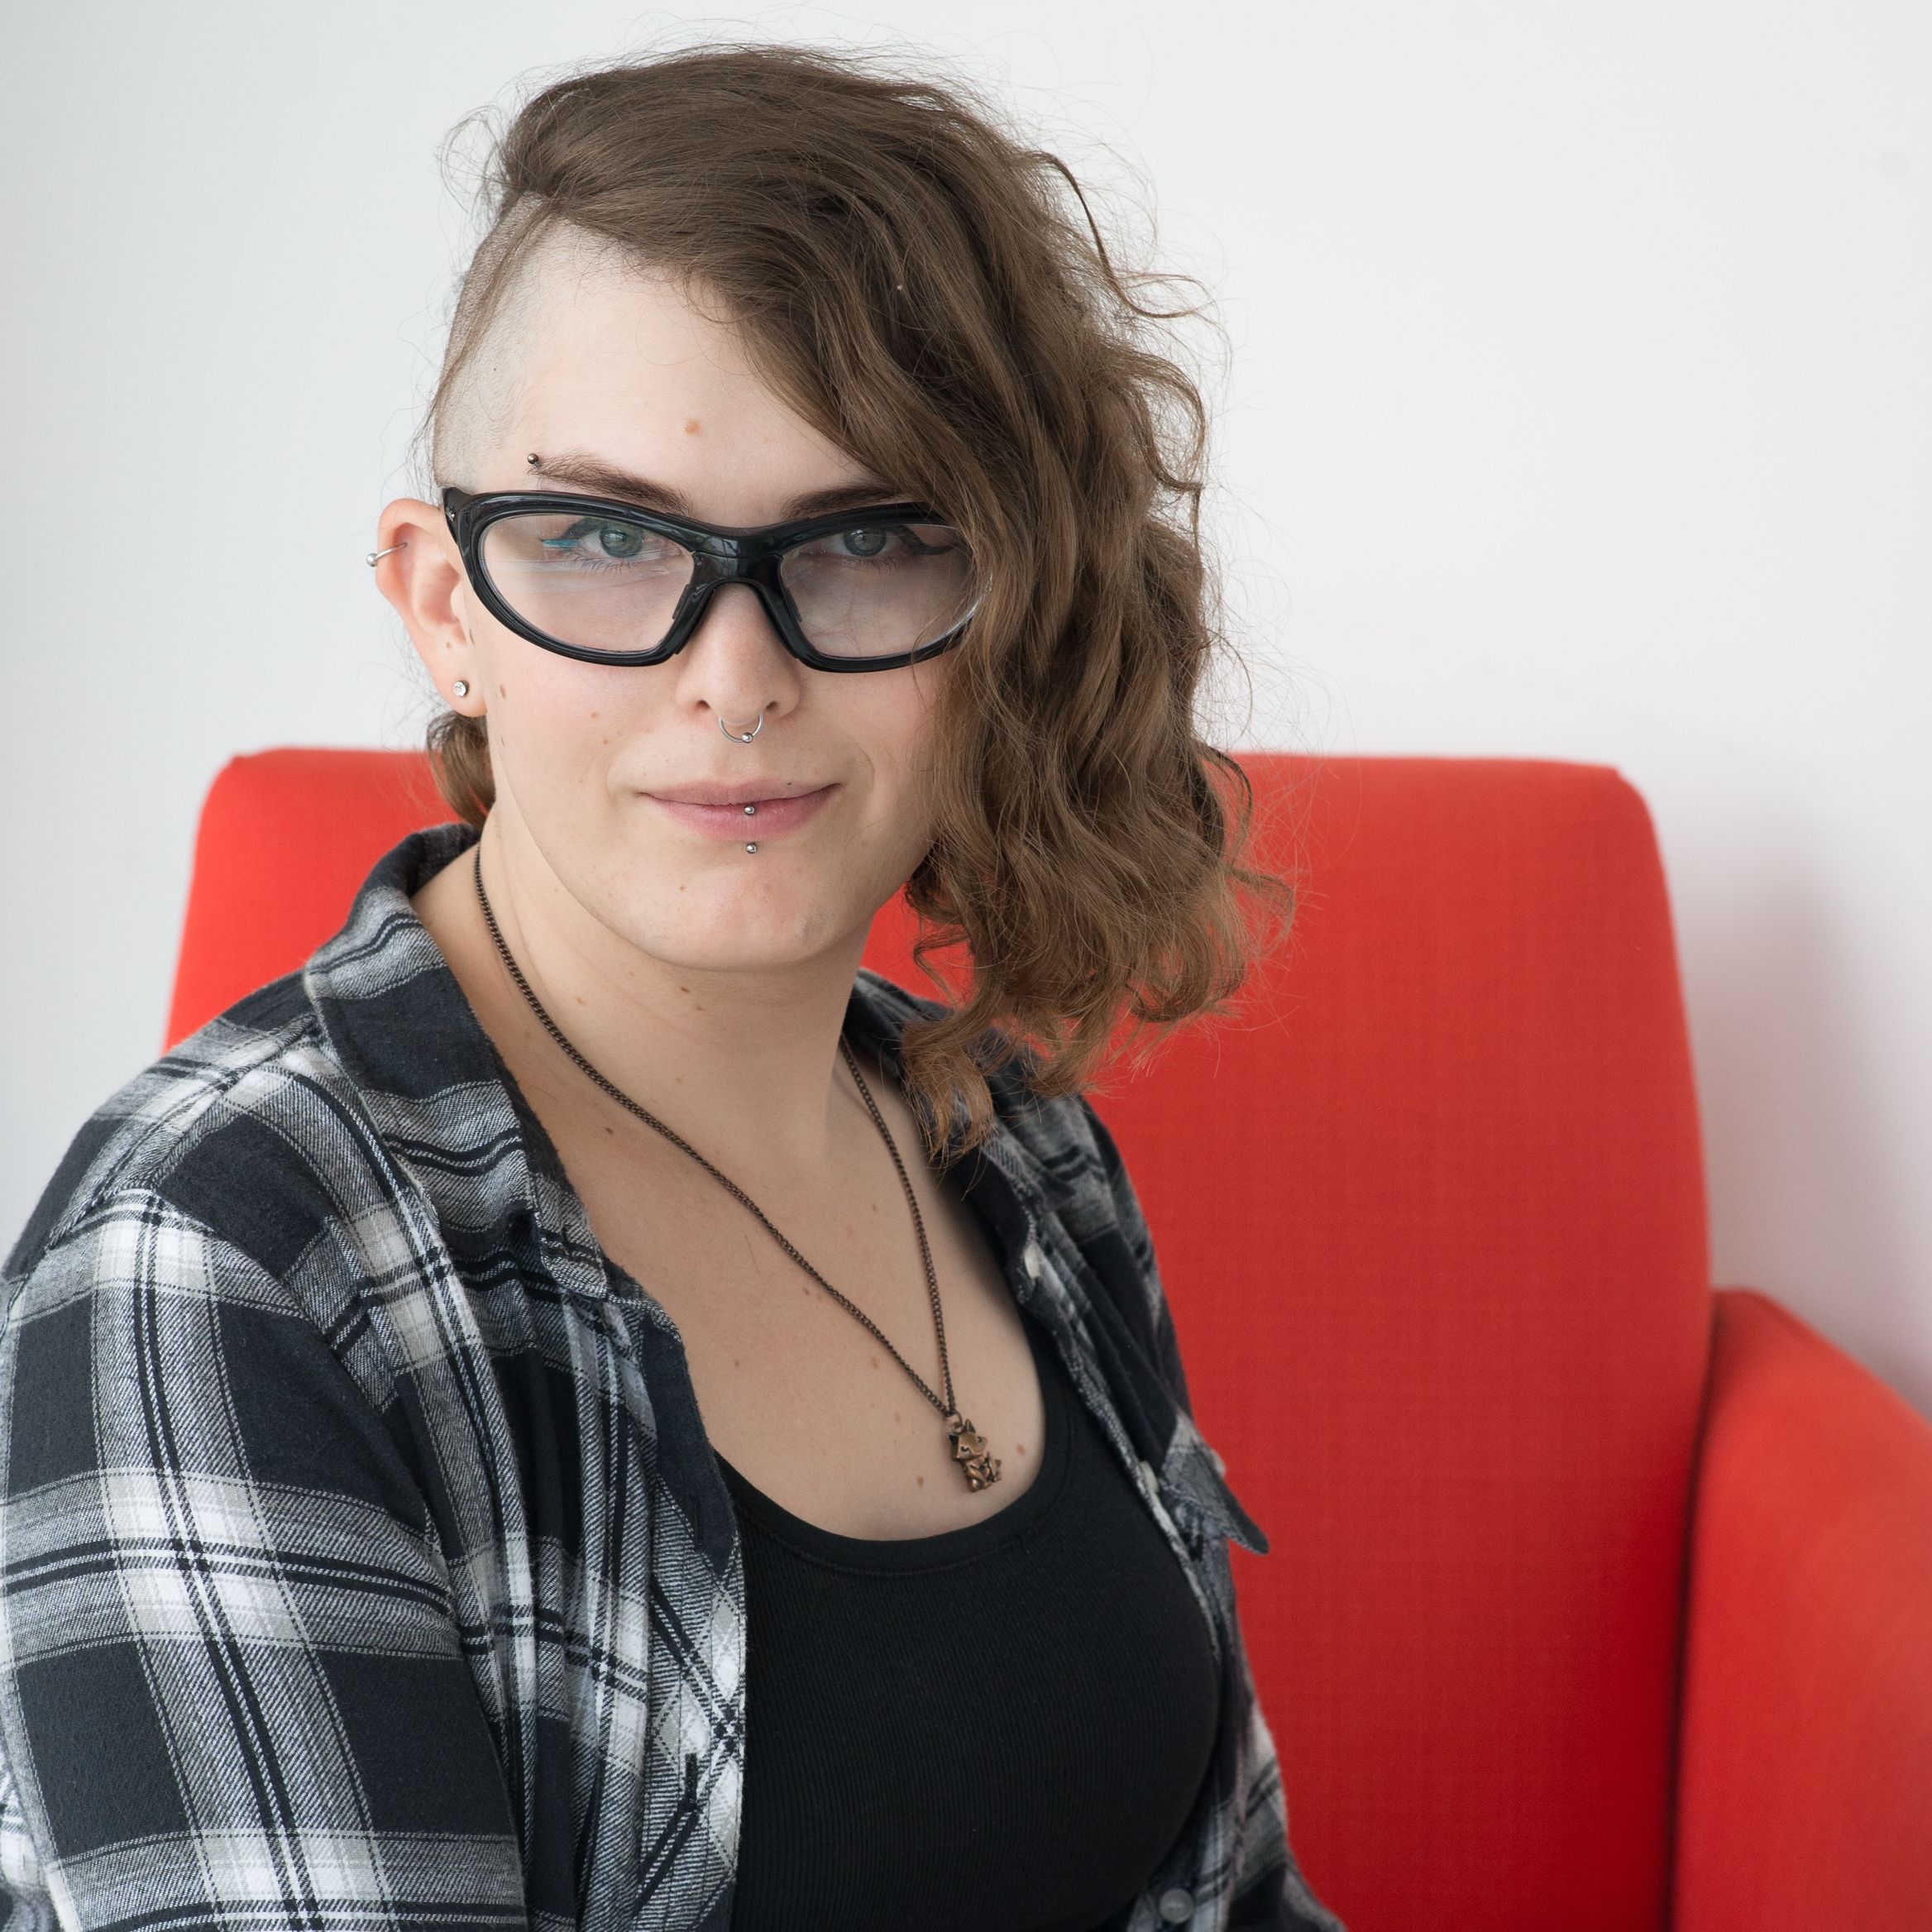 A headshot of June Epstein. She is wearing a black and white plaid shirt and is sitting on a red chair.